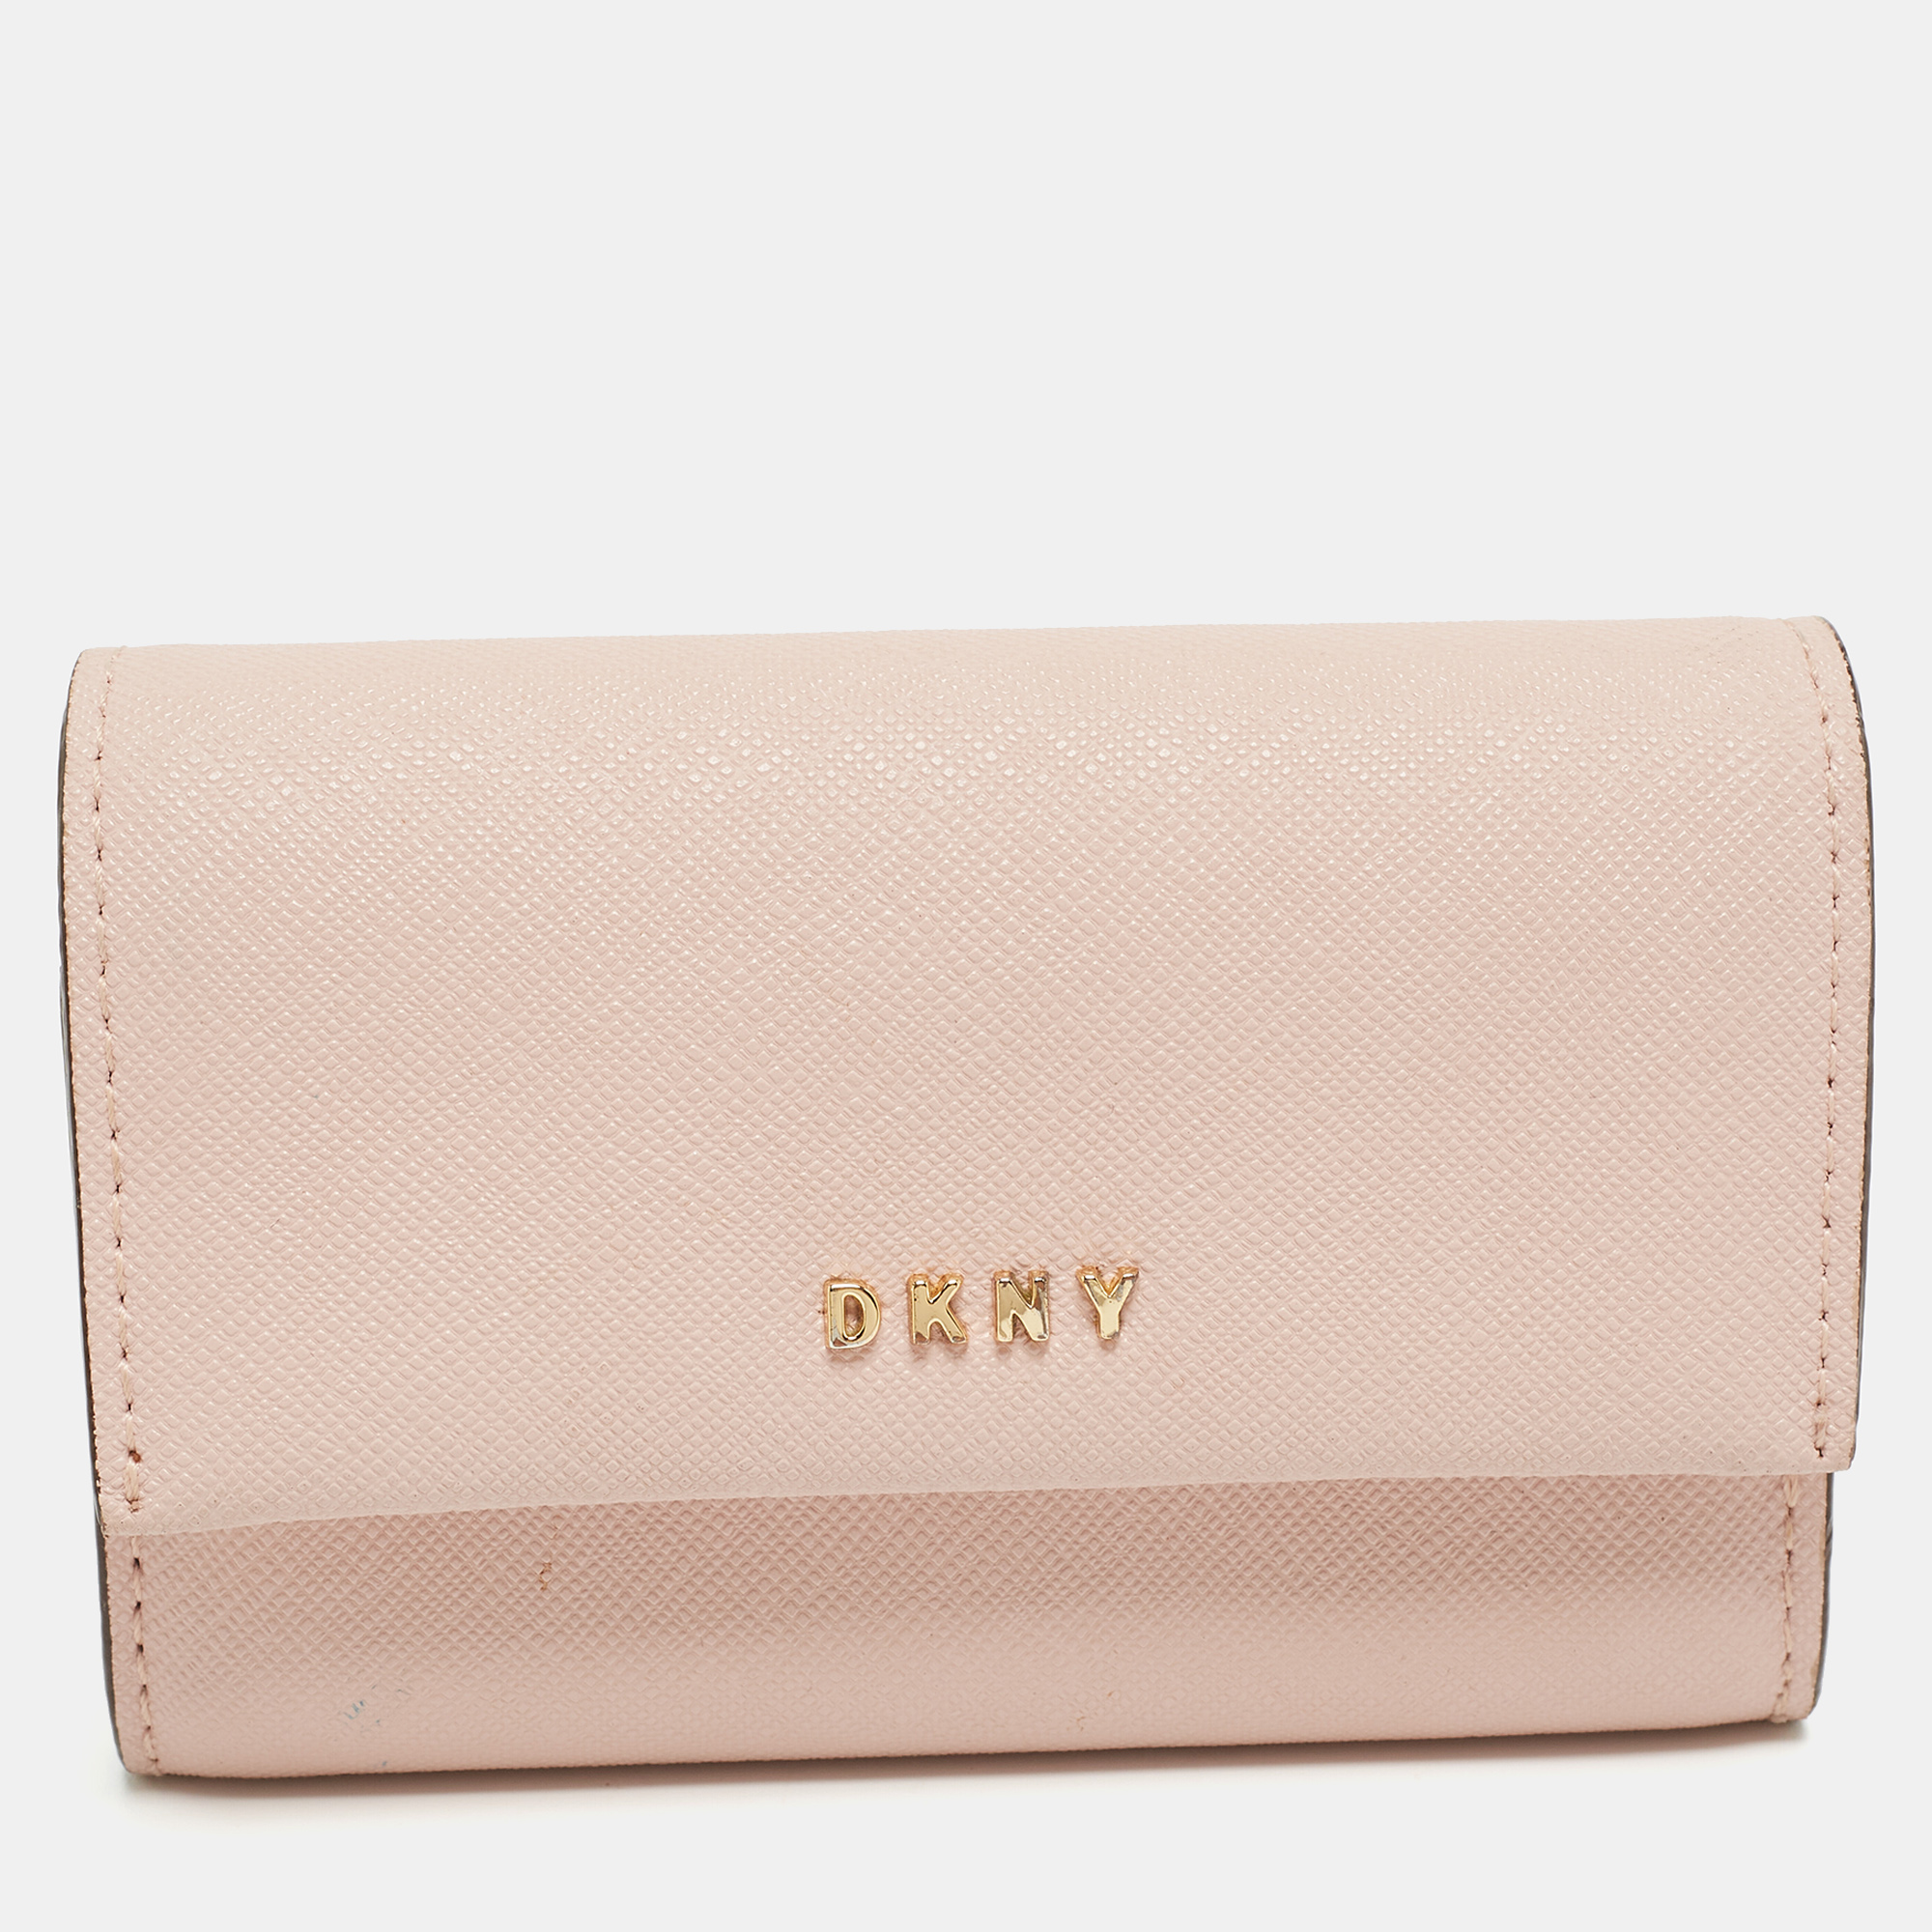 Pre-owned Dkny Pink Saffiano Leather Flap Compact Wallet